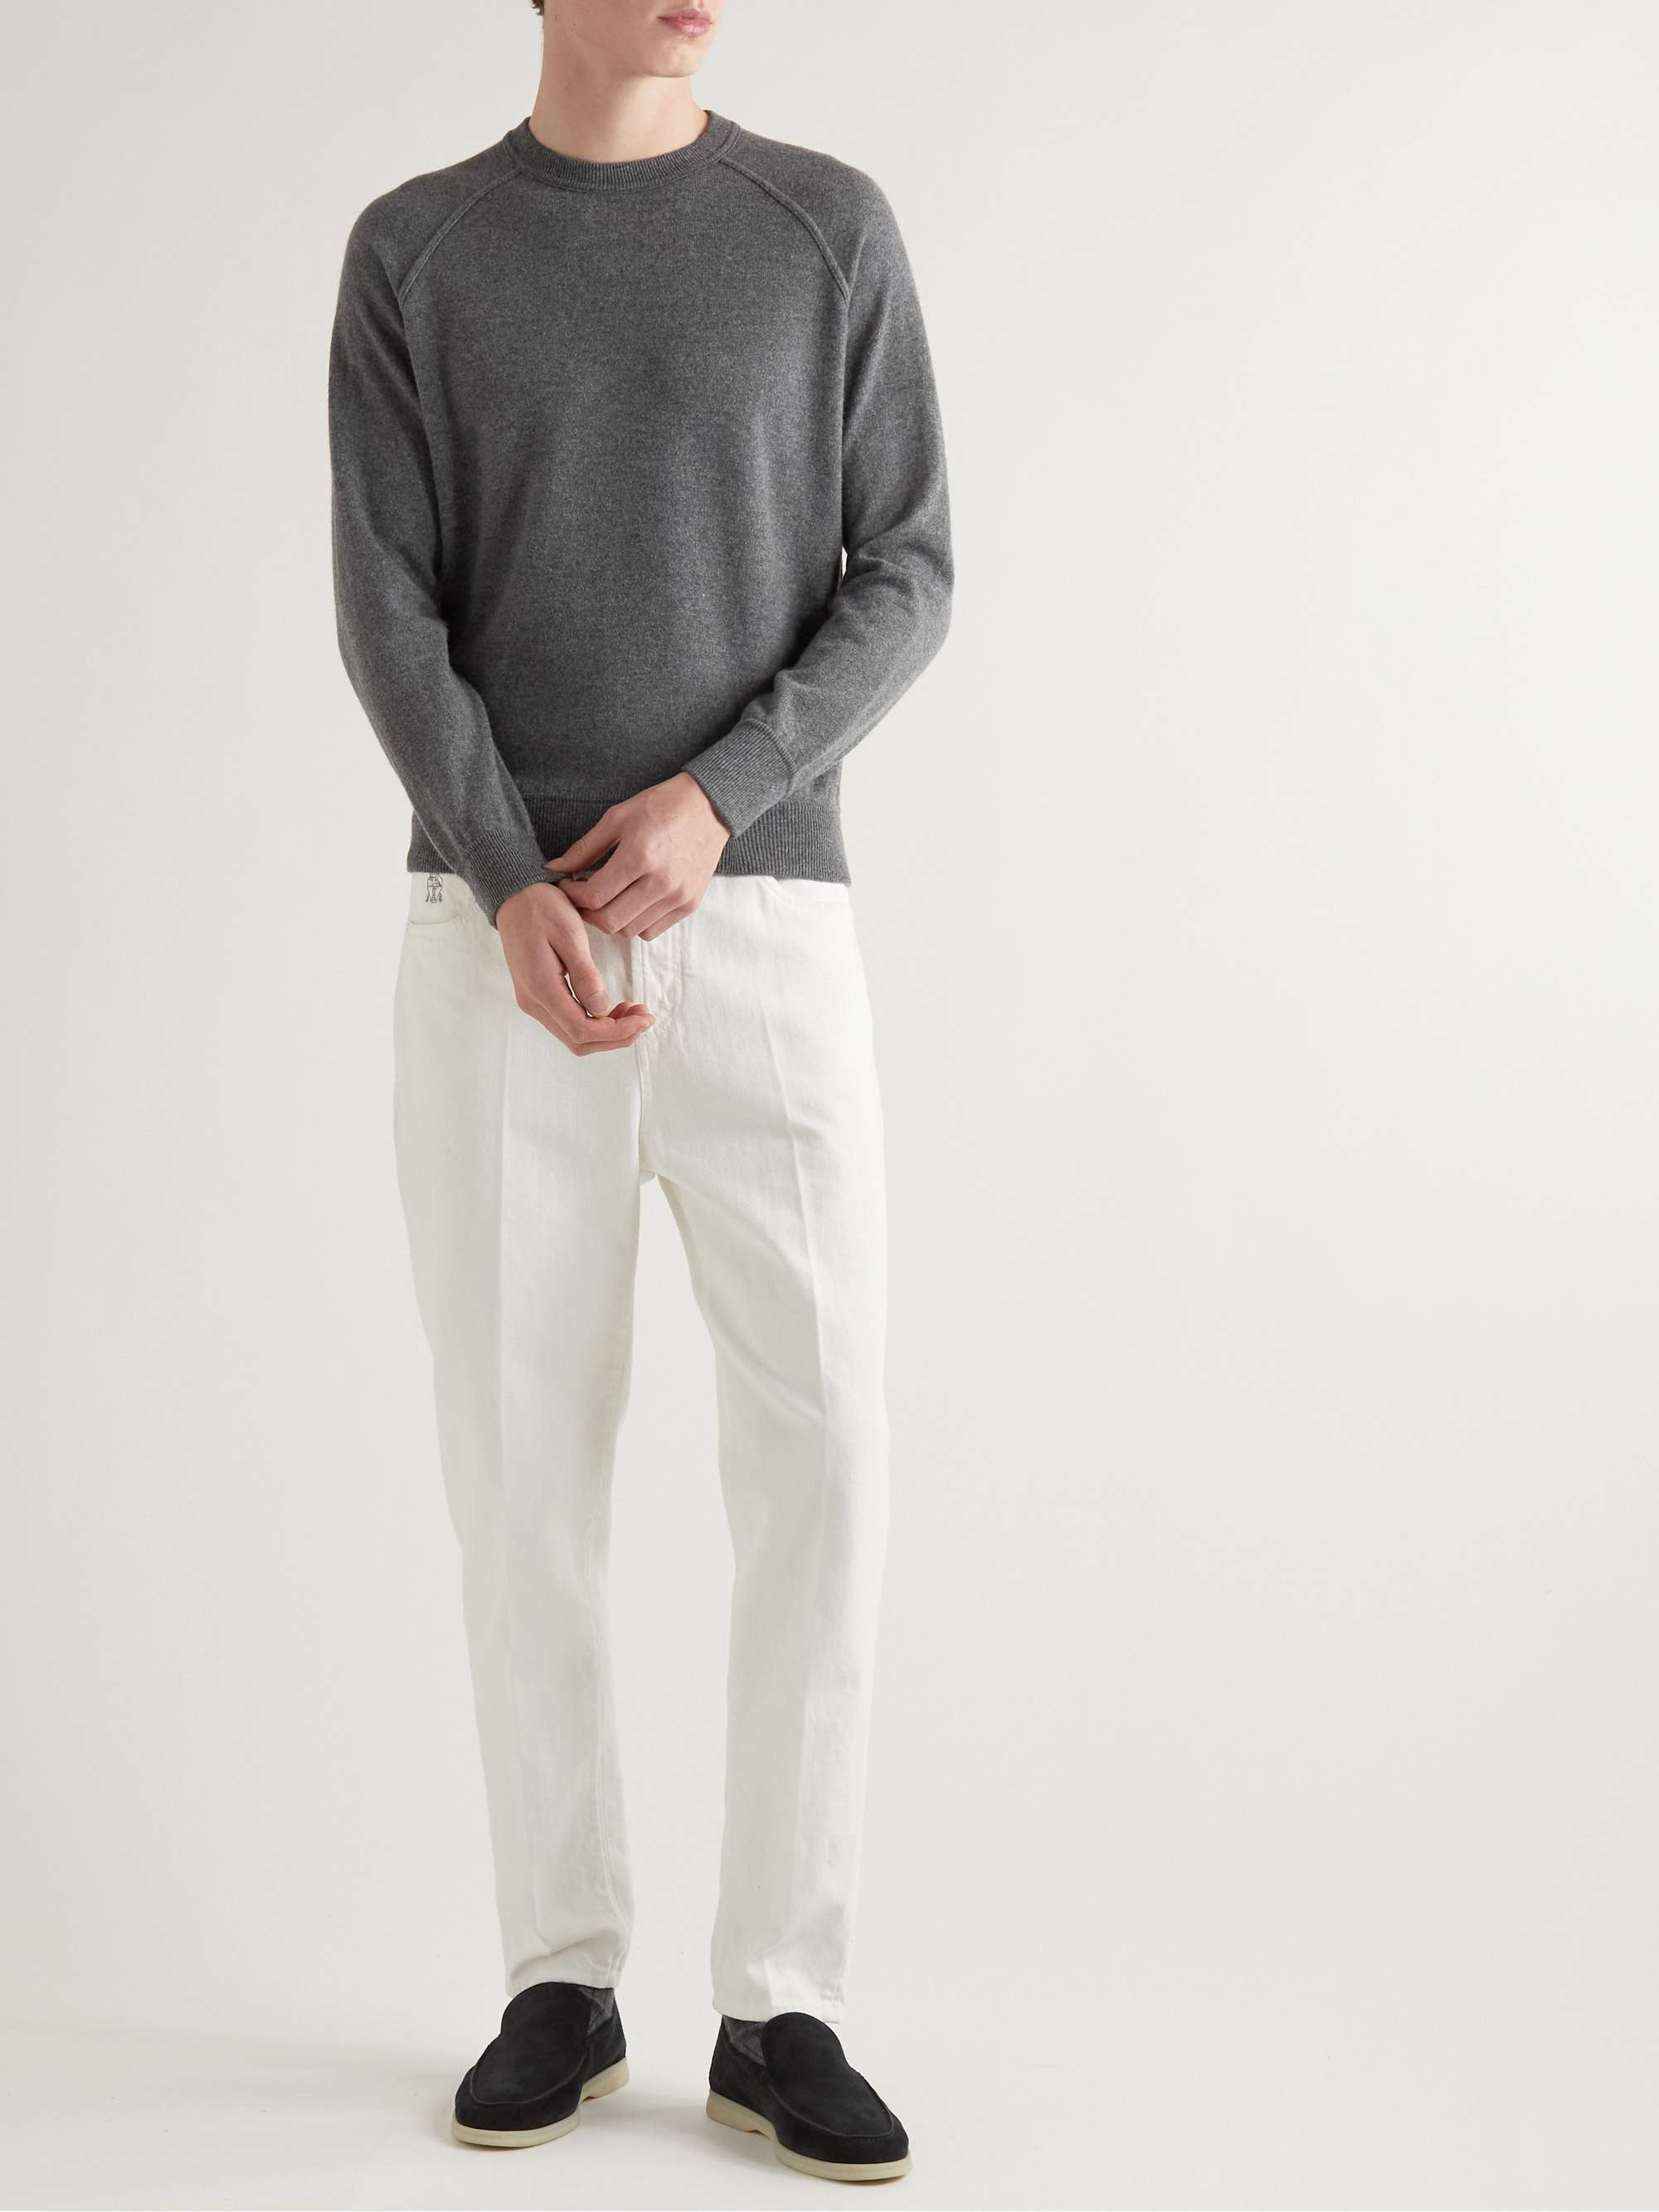 THOM SWEENEY Wool and Cashmere-Blend Sweater